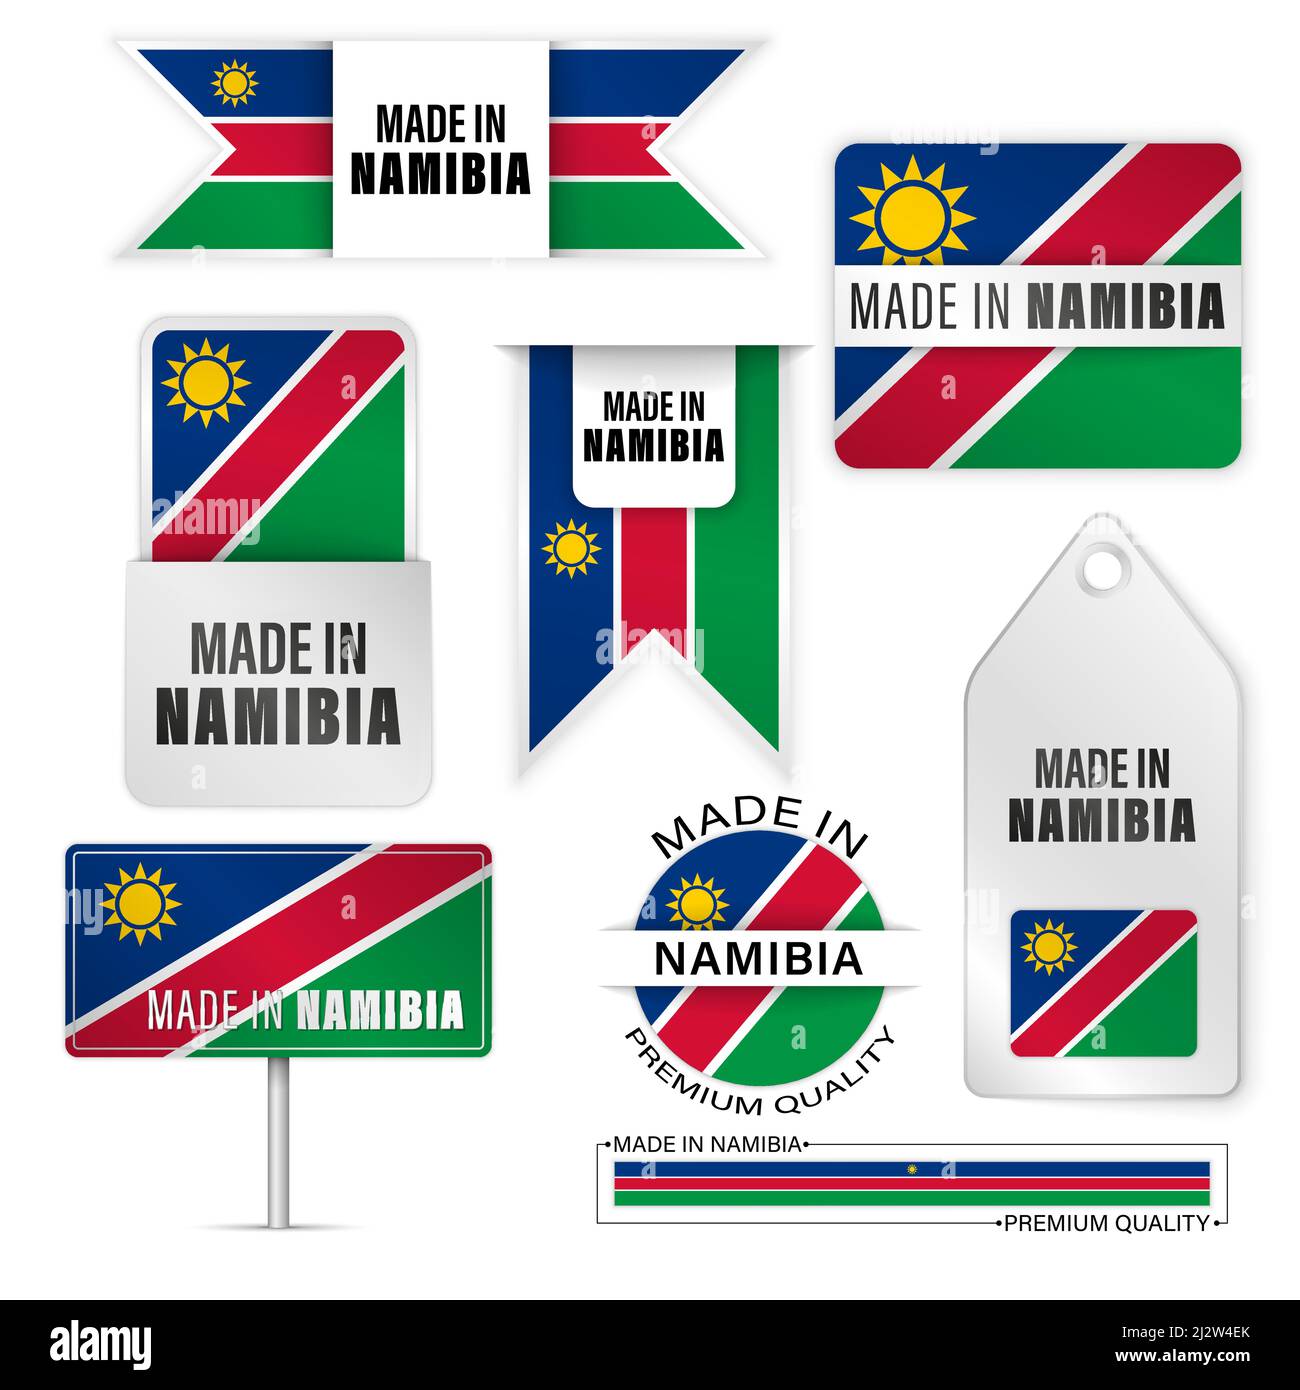 Made in Namibia graphics and labels set. Some elements of impact for the use you want to make of it. Stock Vector